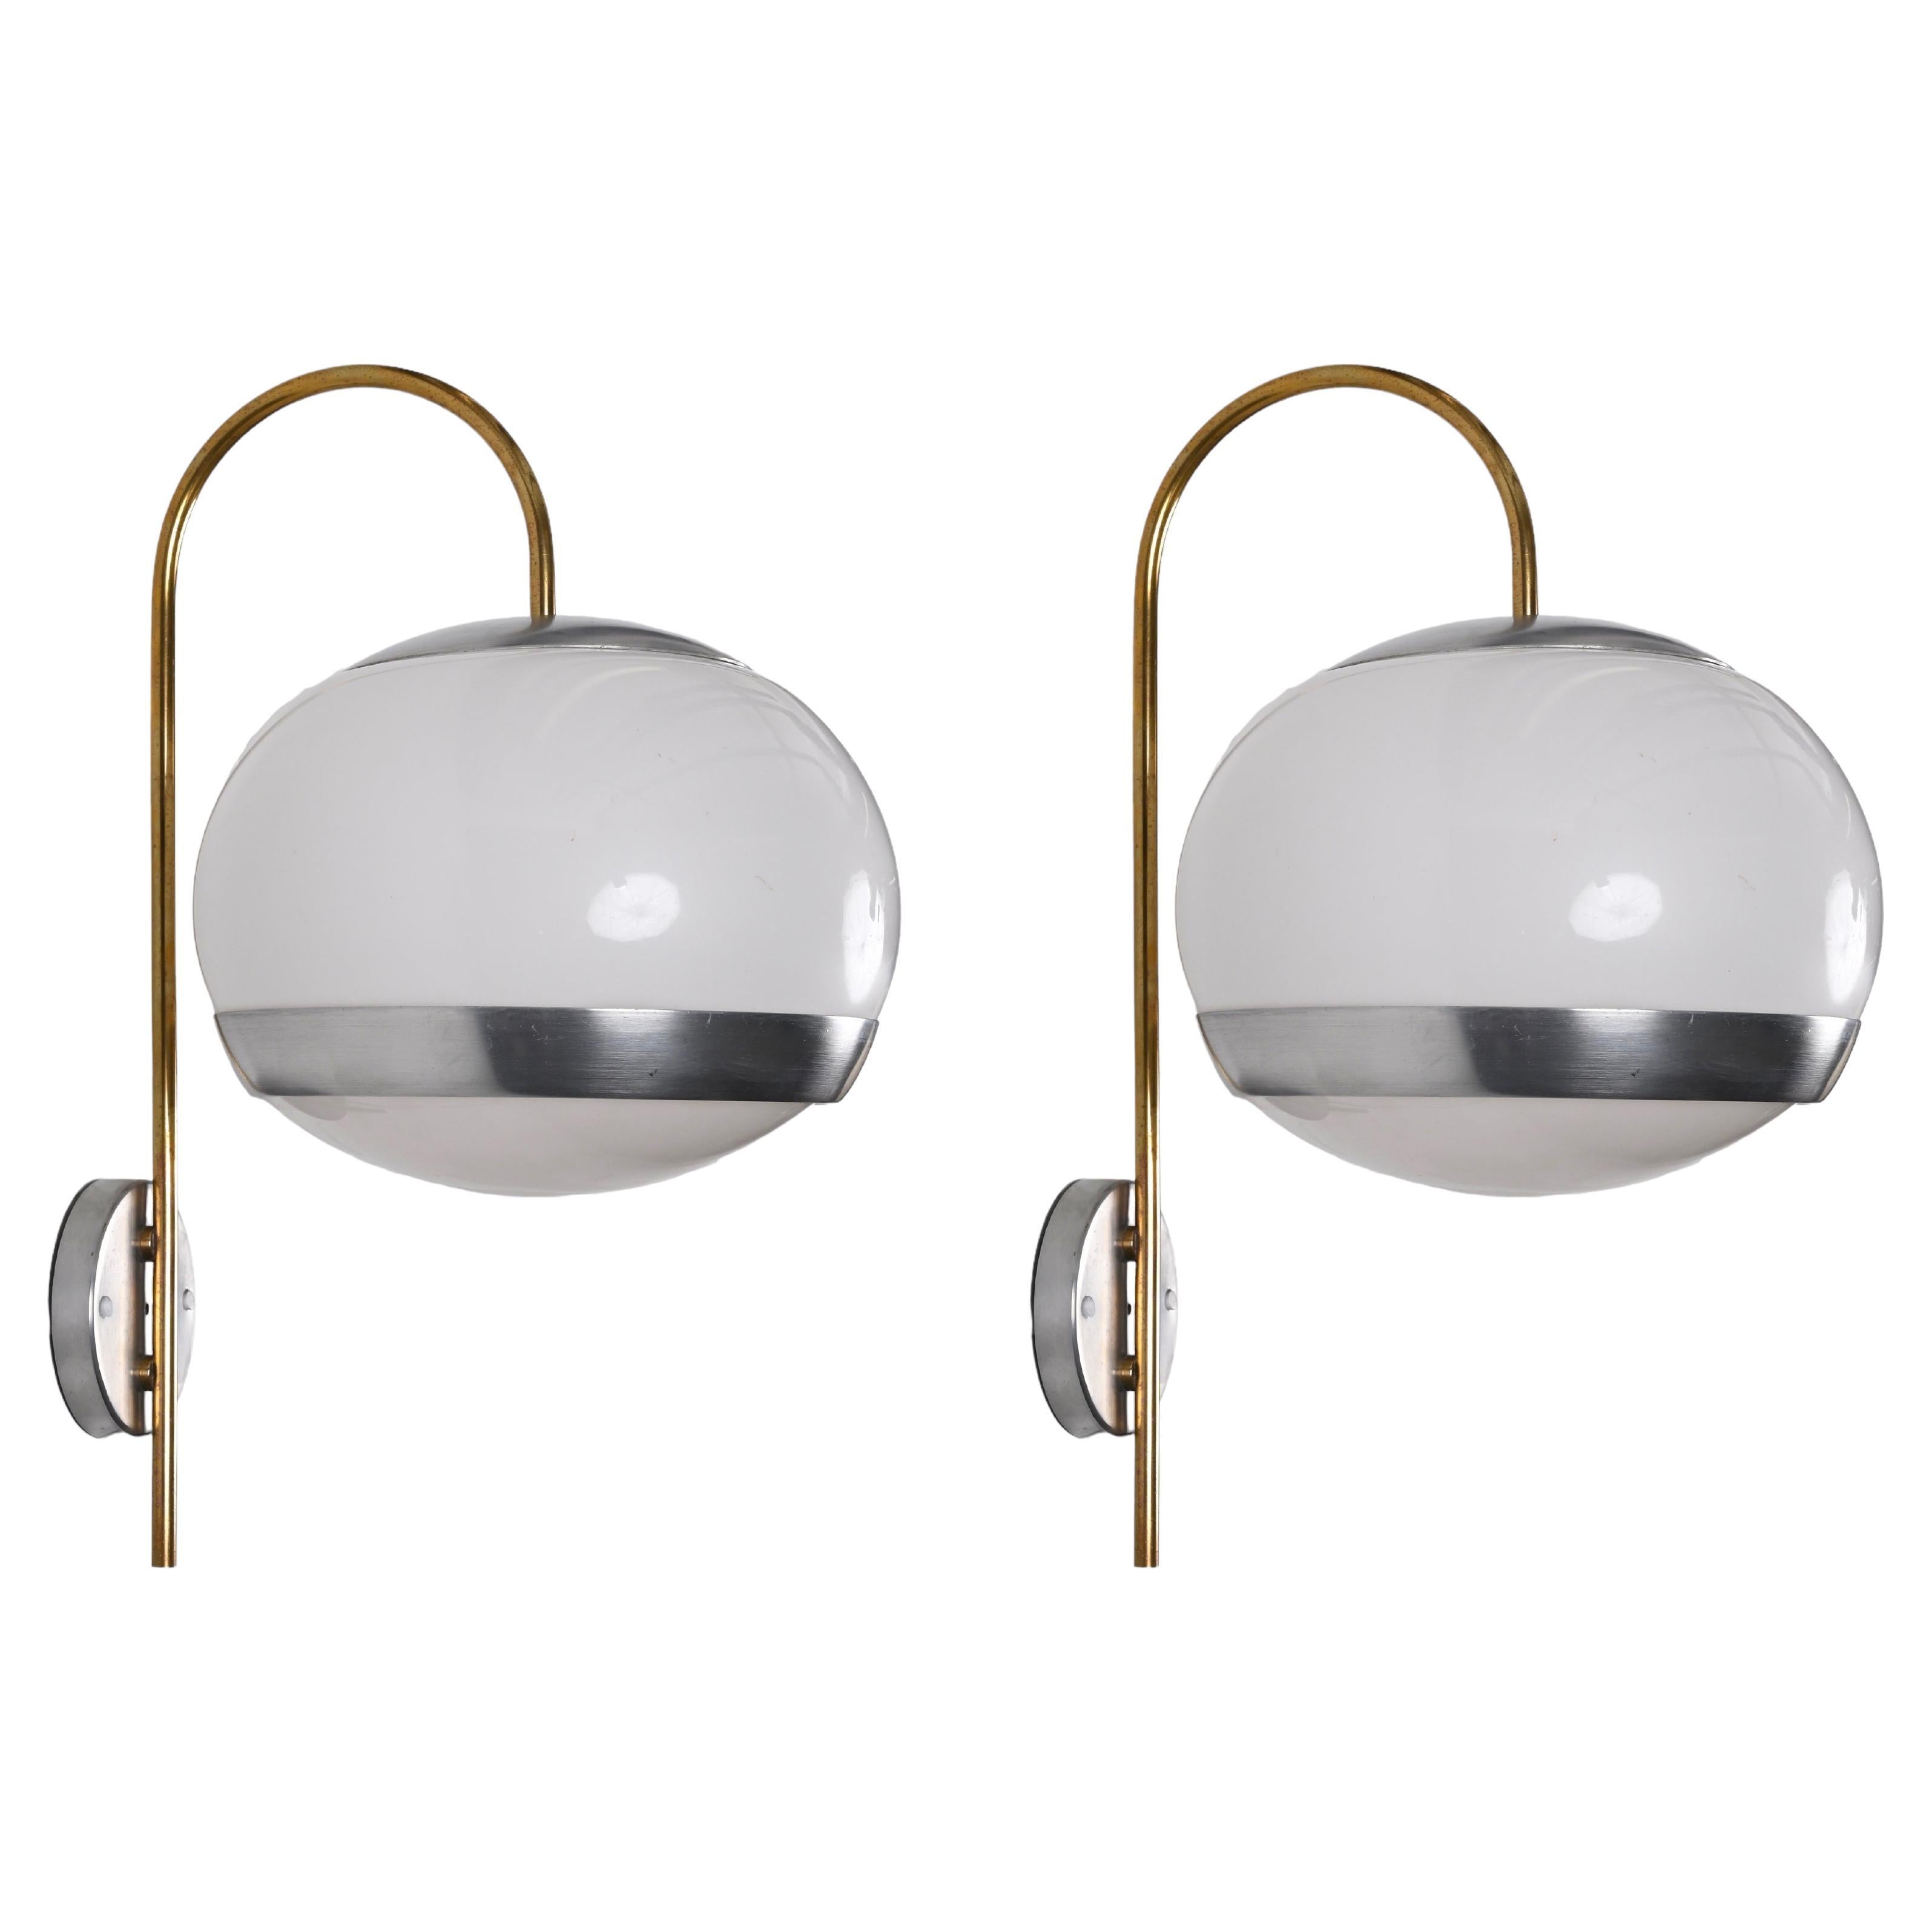 Pair of Stilux Sconces White Lucite and Brass, Italian Lighting, 1970s For Sale